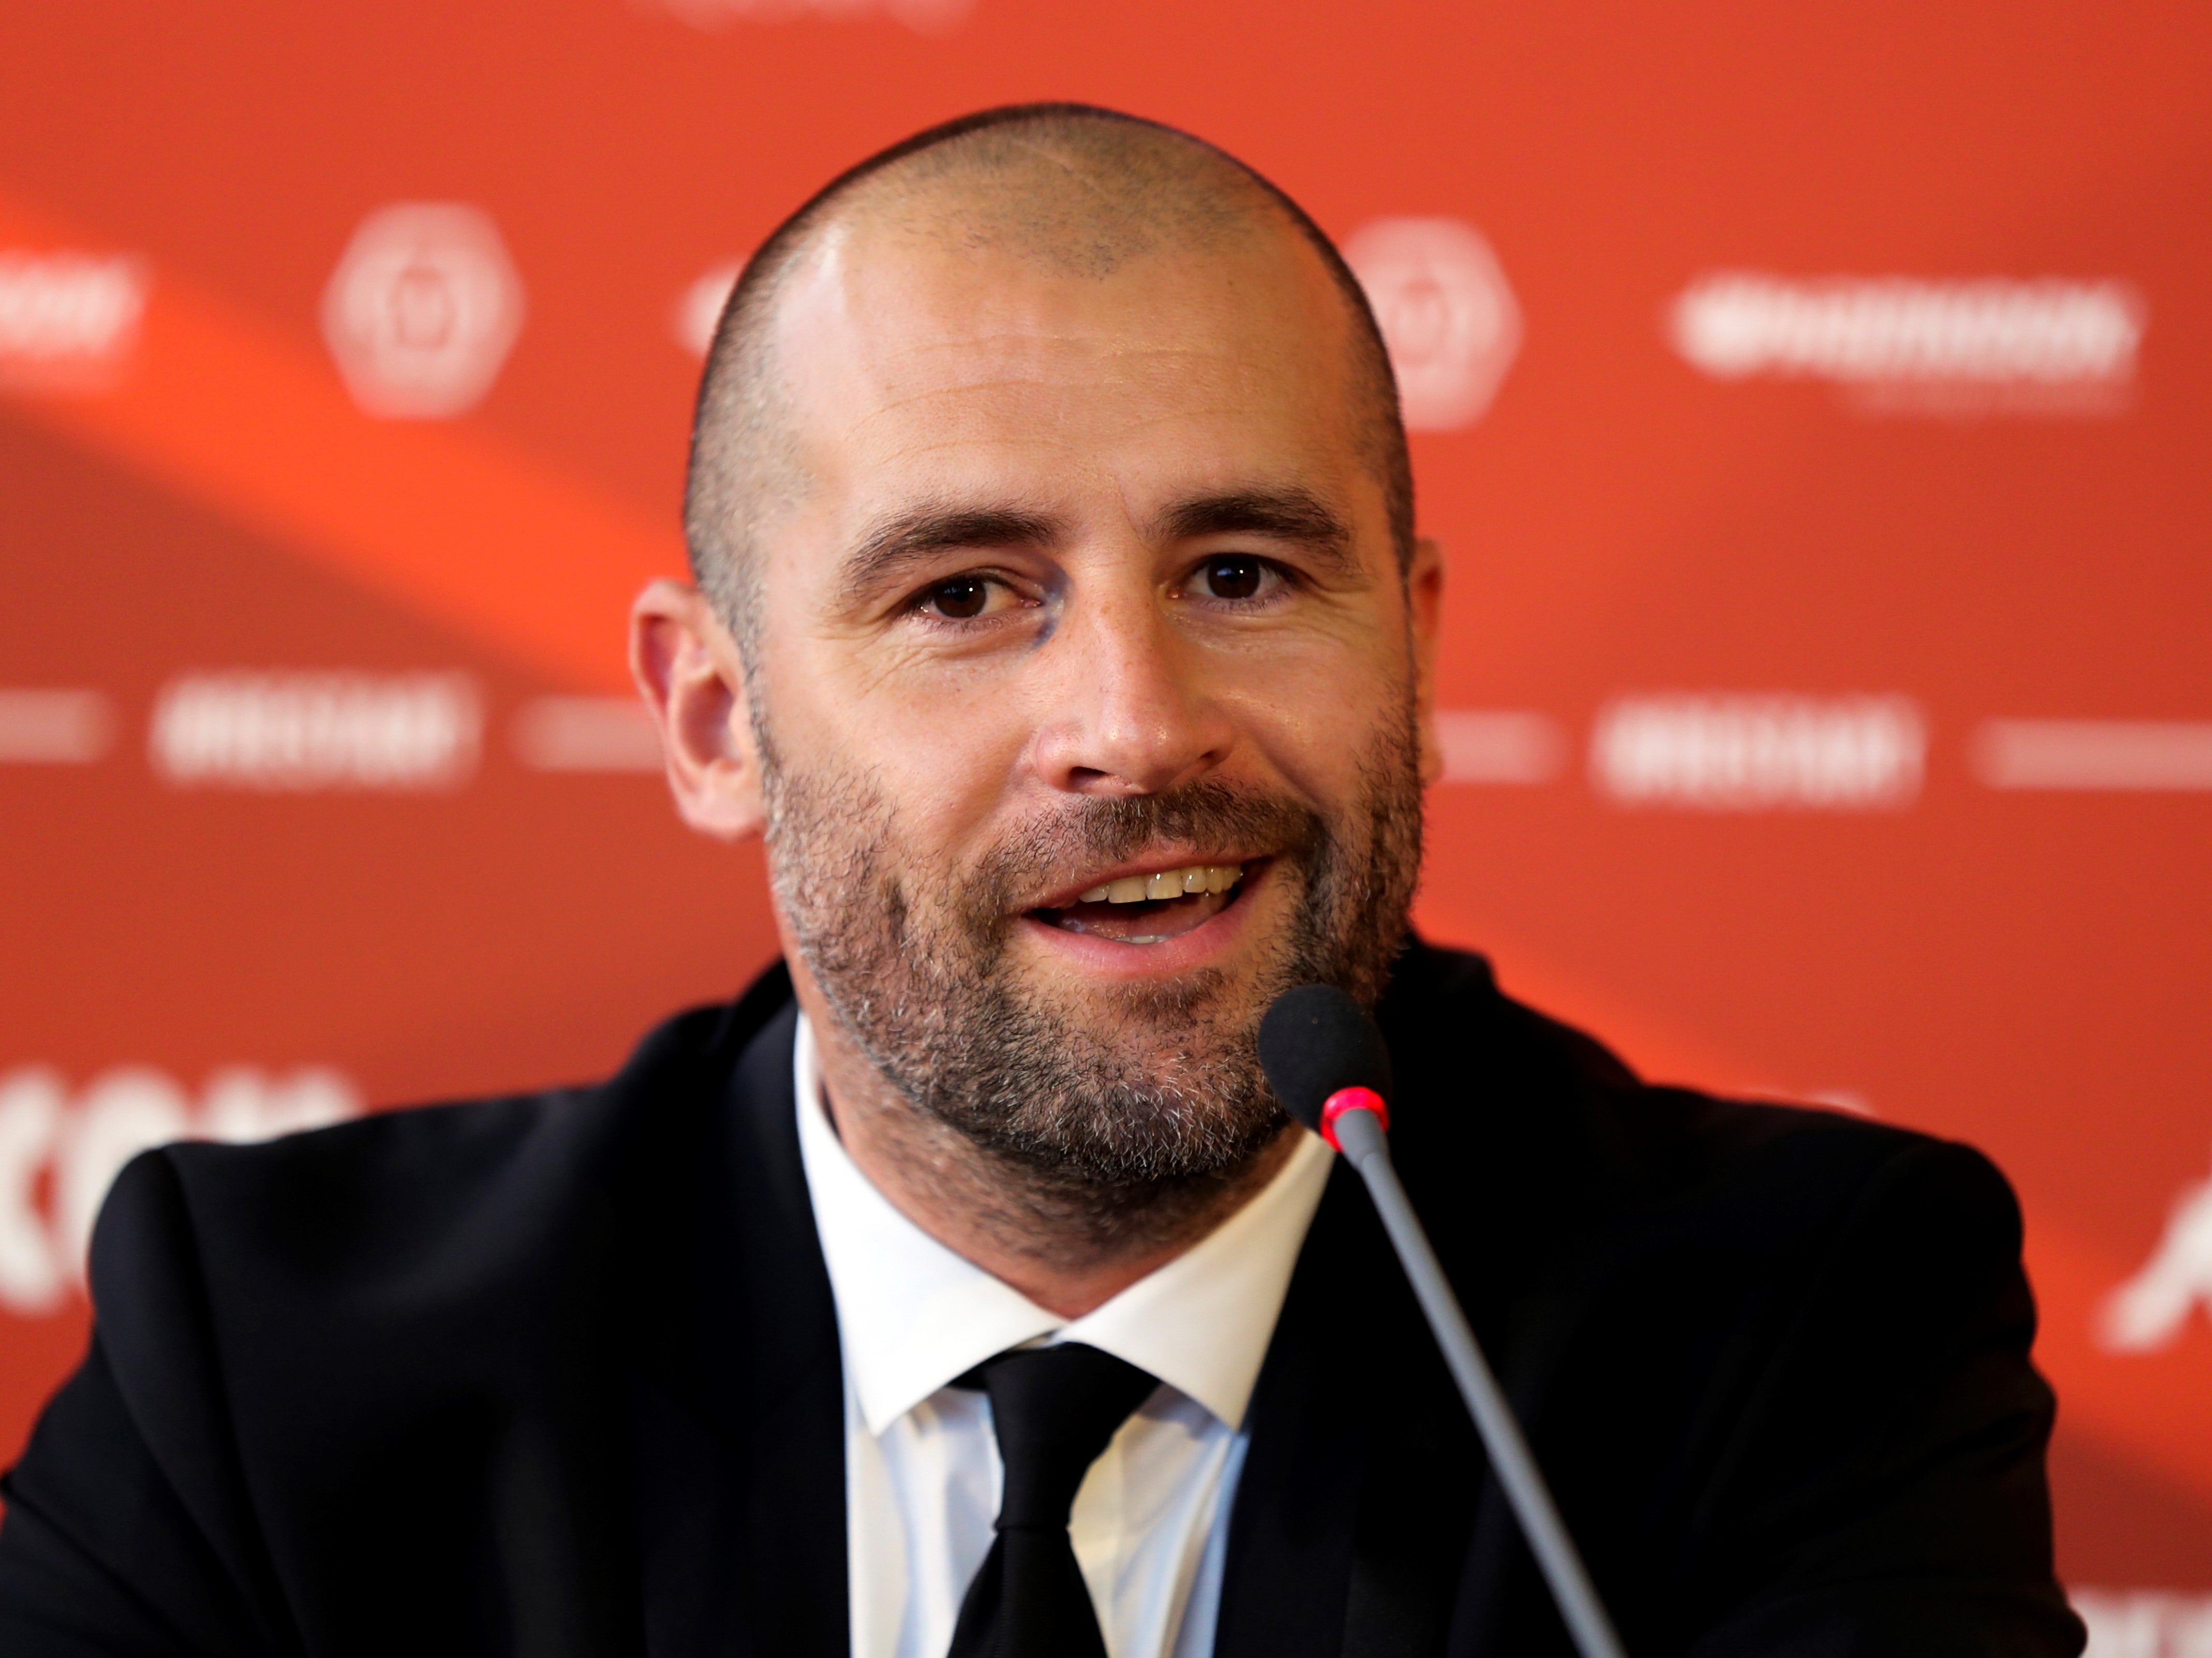 AS Monaco sporting director Paul Mitchell